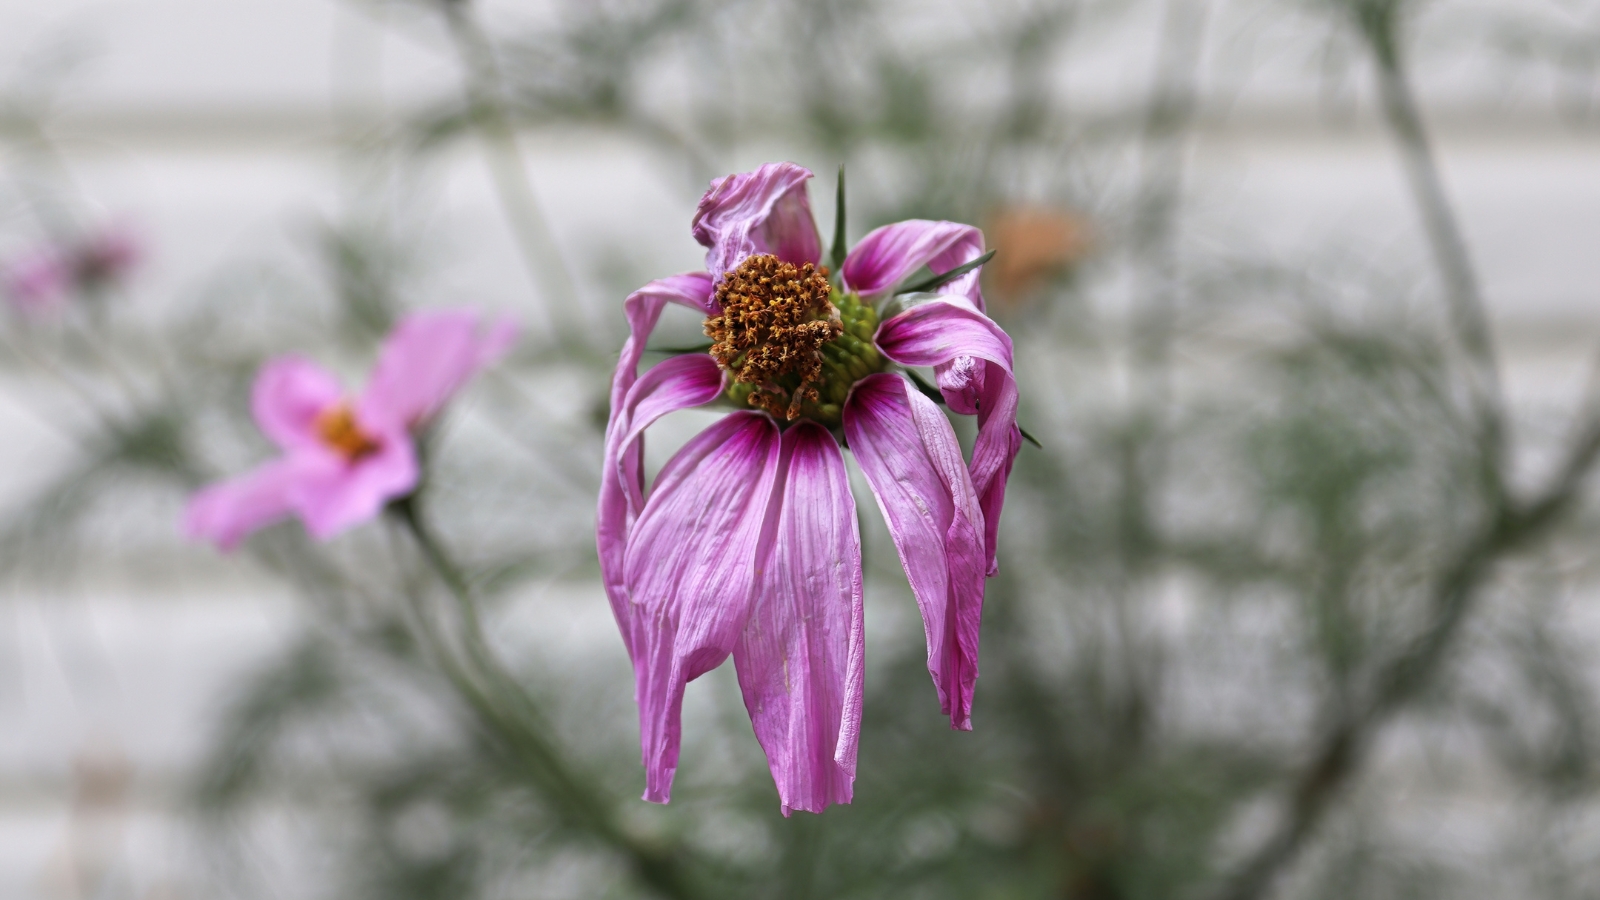 A close-up of a fading purple cosmos, its petals drooping sadly amidst blurred stems and another flower in the background, portraying the beauty of wilting nature.